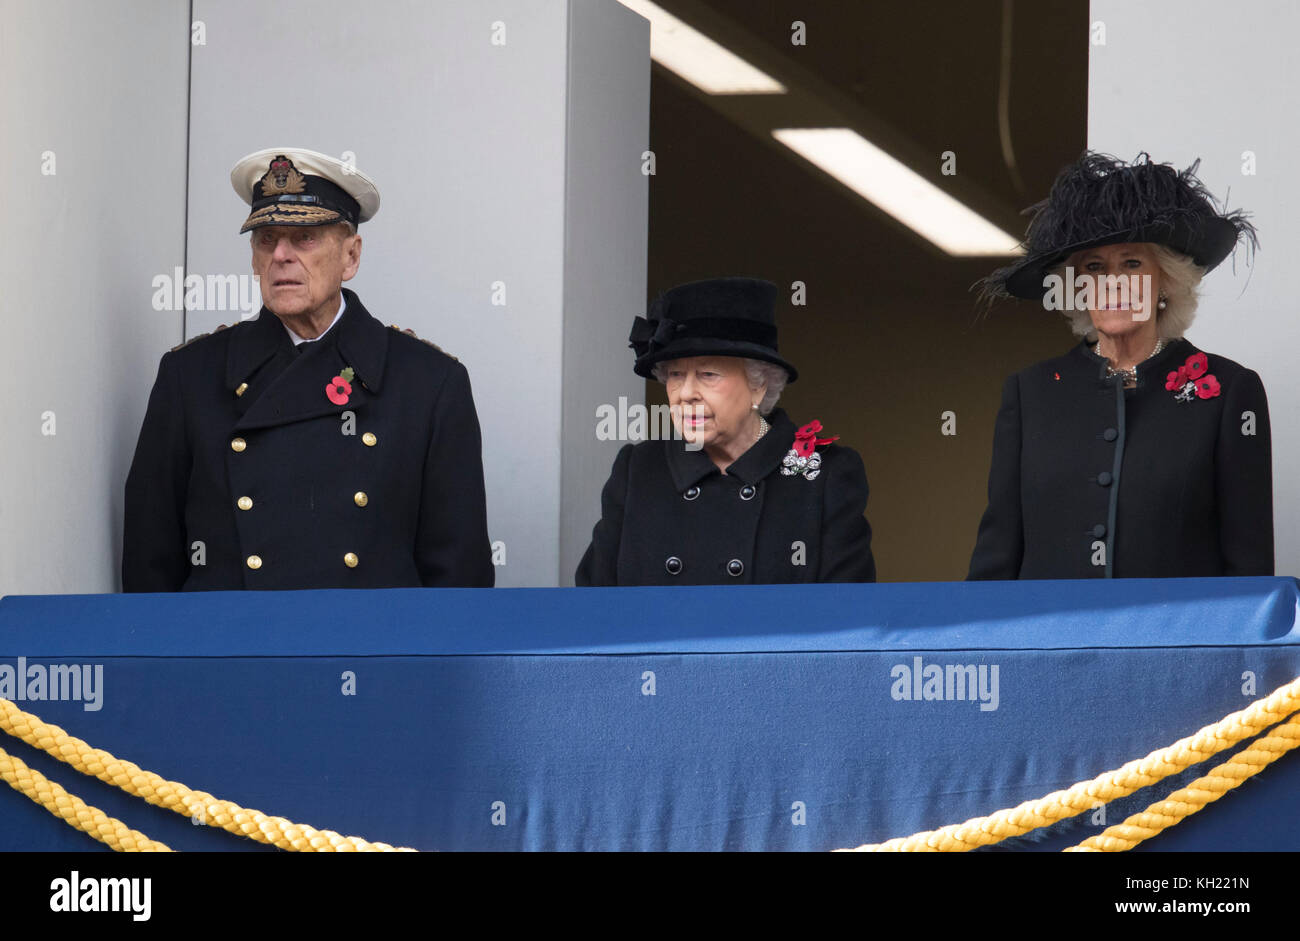 Britain's Queen Elizabeth II stands on the balcony with Britain's Prince Philip, Duke of Edinburgh and Britain's Camilla, Duchess of Cornwall during the Remembrance Sunday ceremony at the Cenotaph on Whitehall in central London, on November 12, 2017. Services are held annually across Commonwealth countries during Remembrance Day to commemorate servicemen and women who have fallen in the line of duty since World War I. Stock Photo